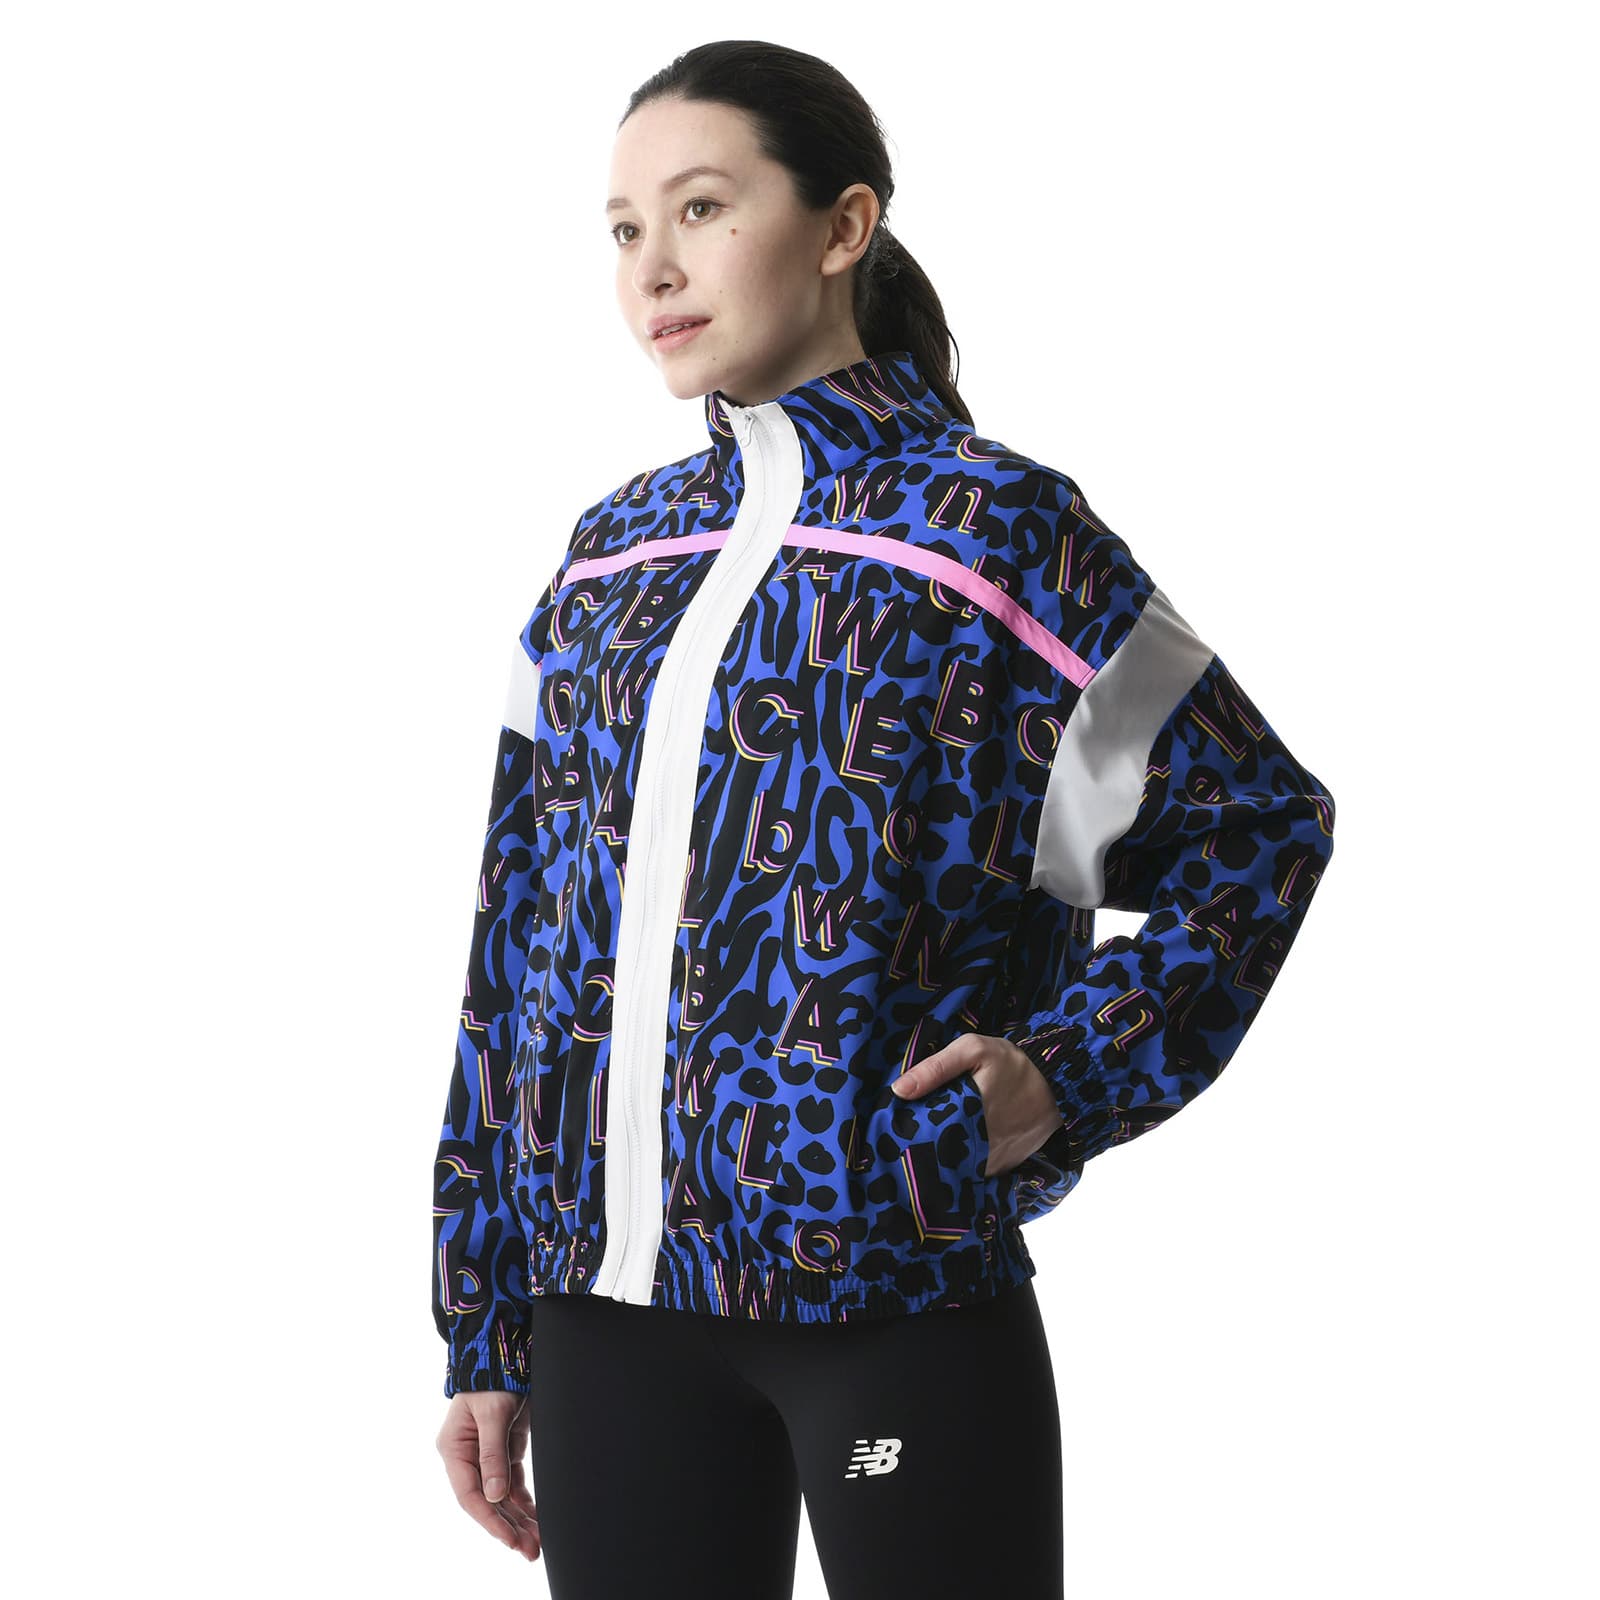 Relentless stretch woven printed jacket